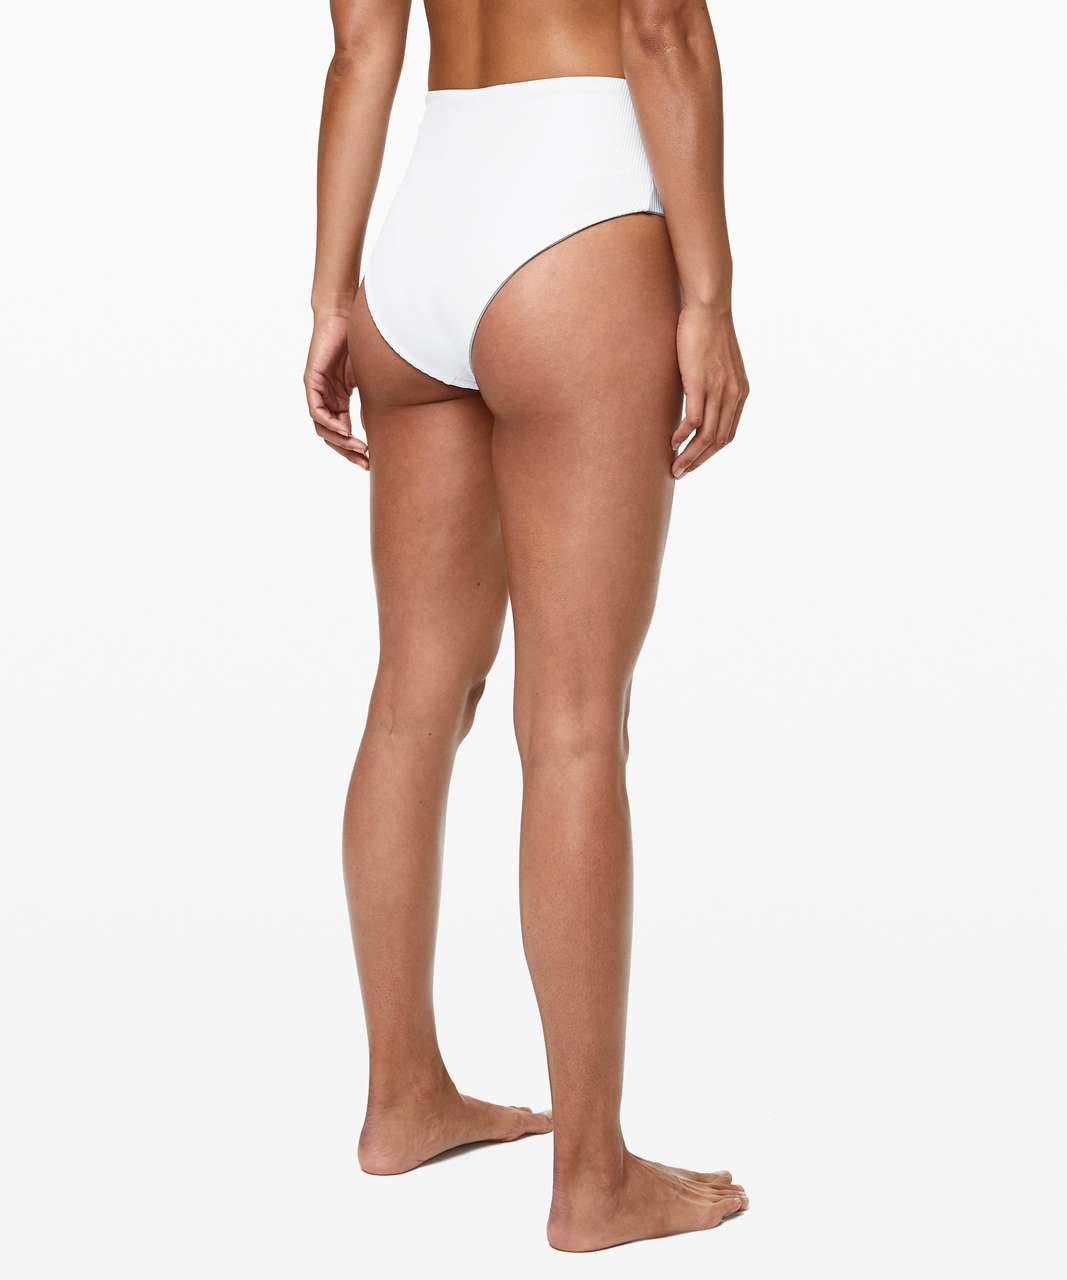 Lululemon Clear Waters High-Rise Skimpy Bottom - White